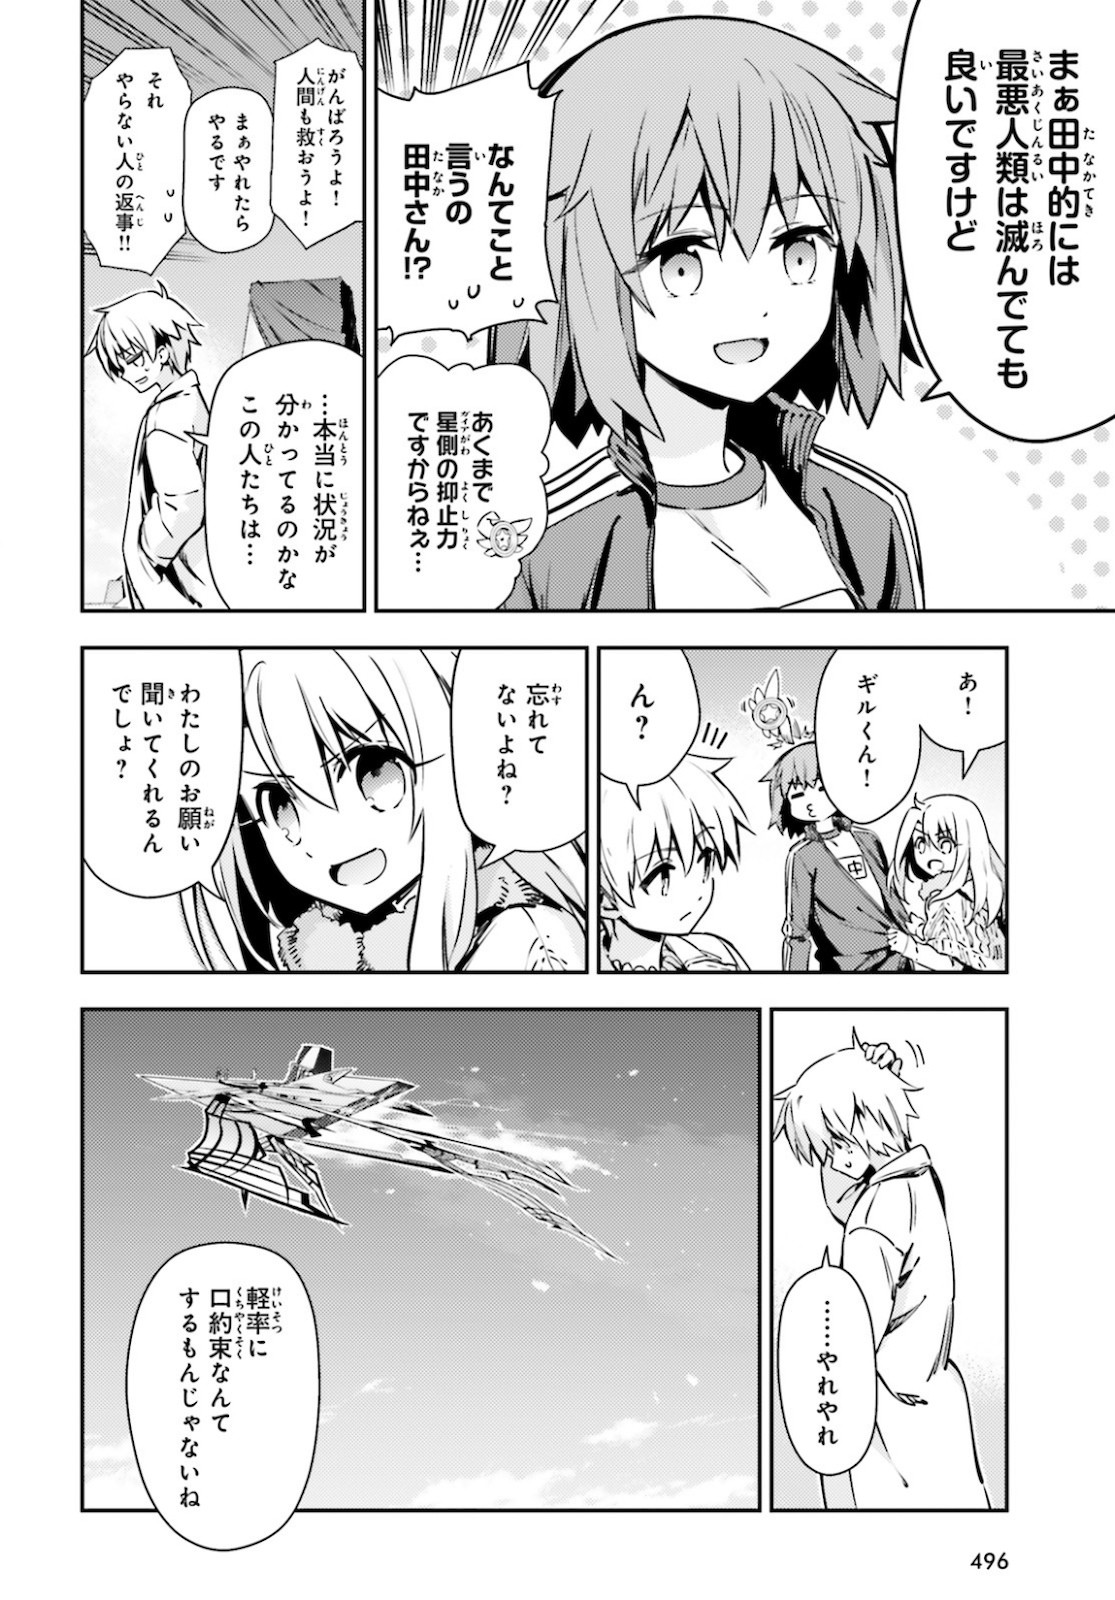 Fate/Kaleid Liner Prisma Illya Drei! - Chapter 62-2 - Page 3